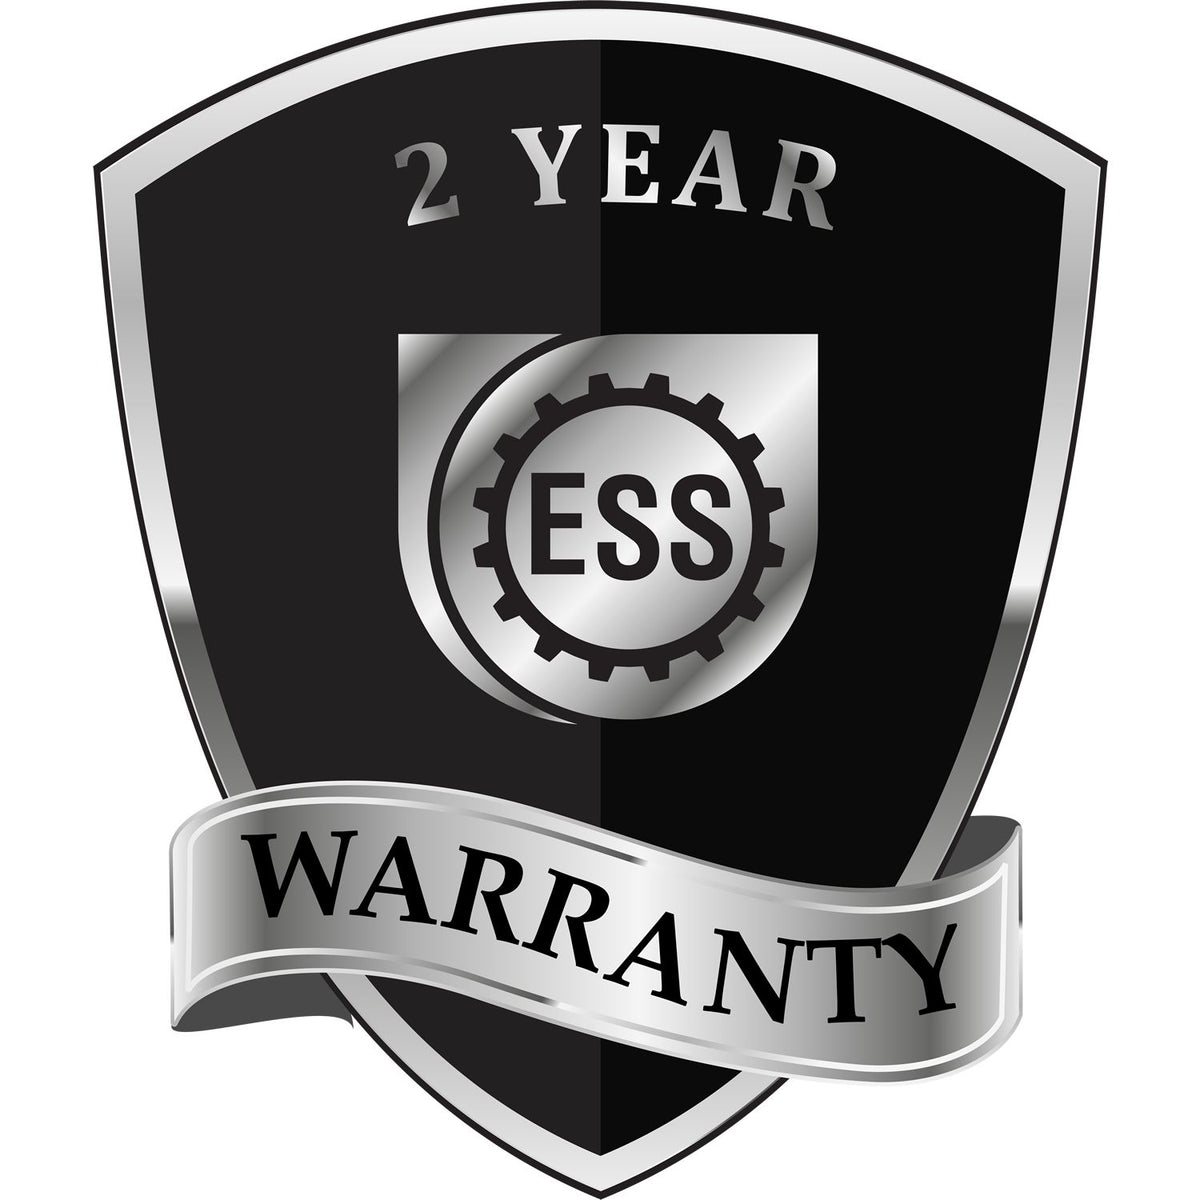 A black and silver badge or emblem showing warranty information for the Heavy Duty Cast Iron Texas Geologist Seal Embosser